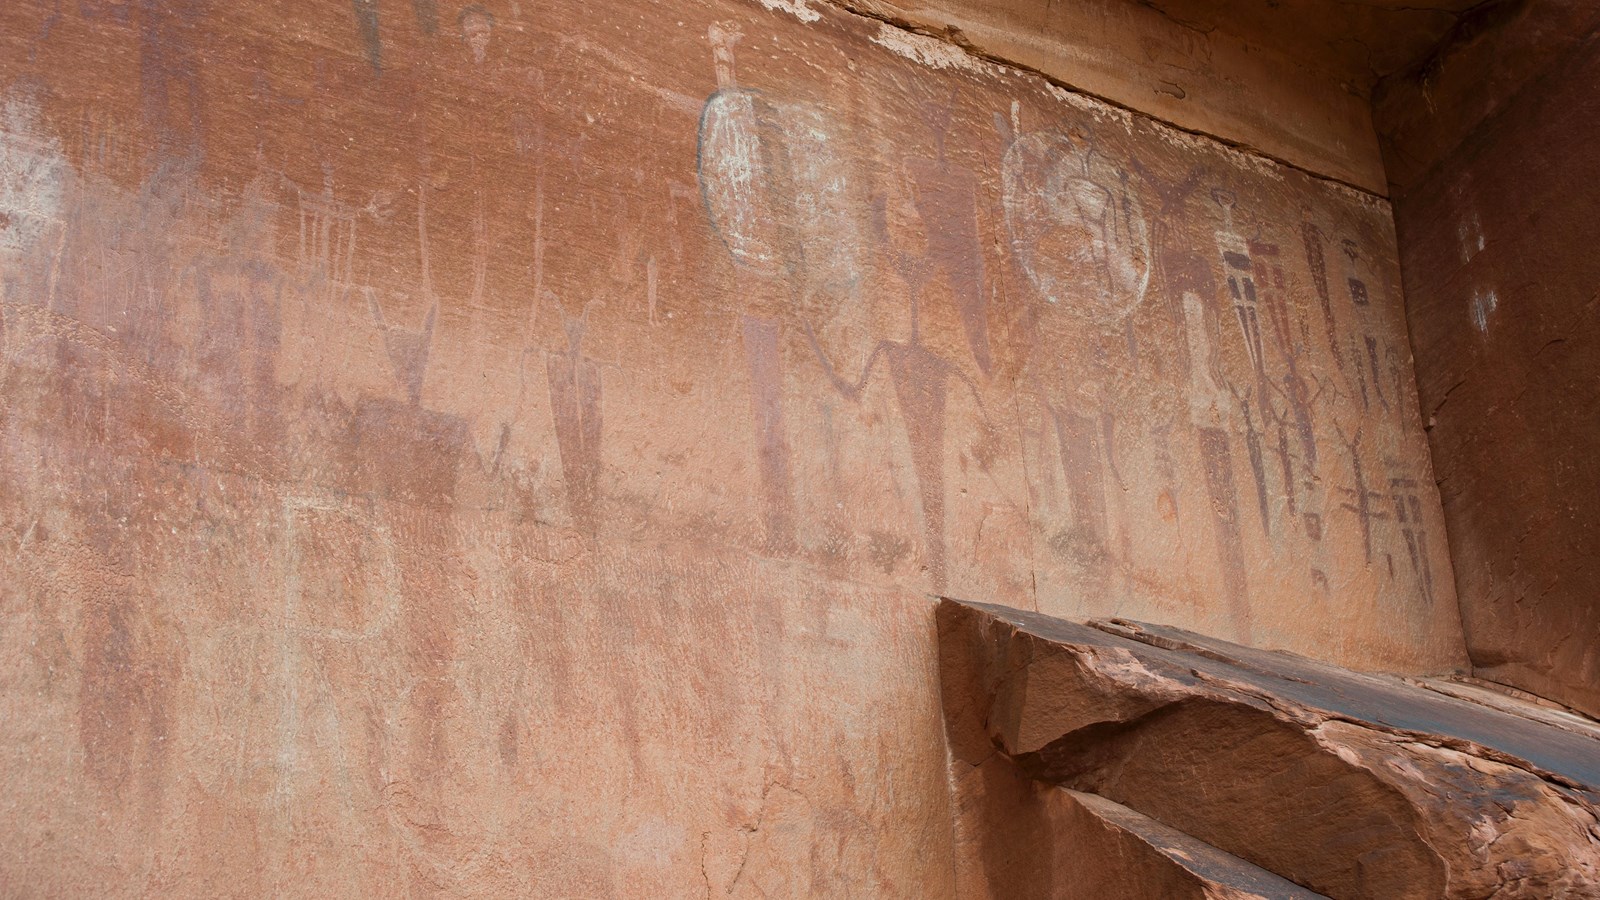 Faint red, white, & brown painted markings of tapered human figures on a sandstone wall